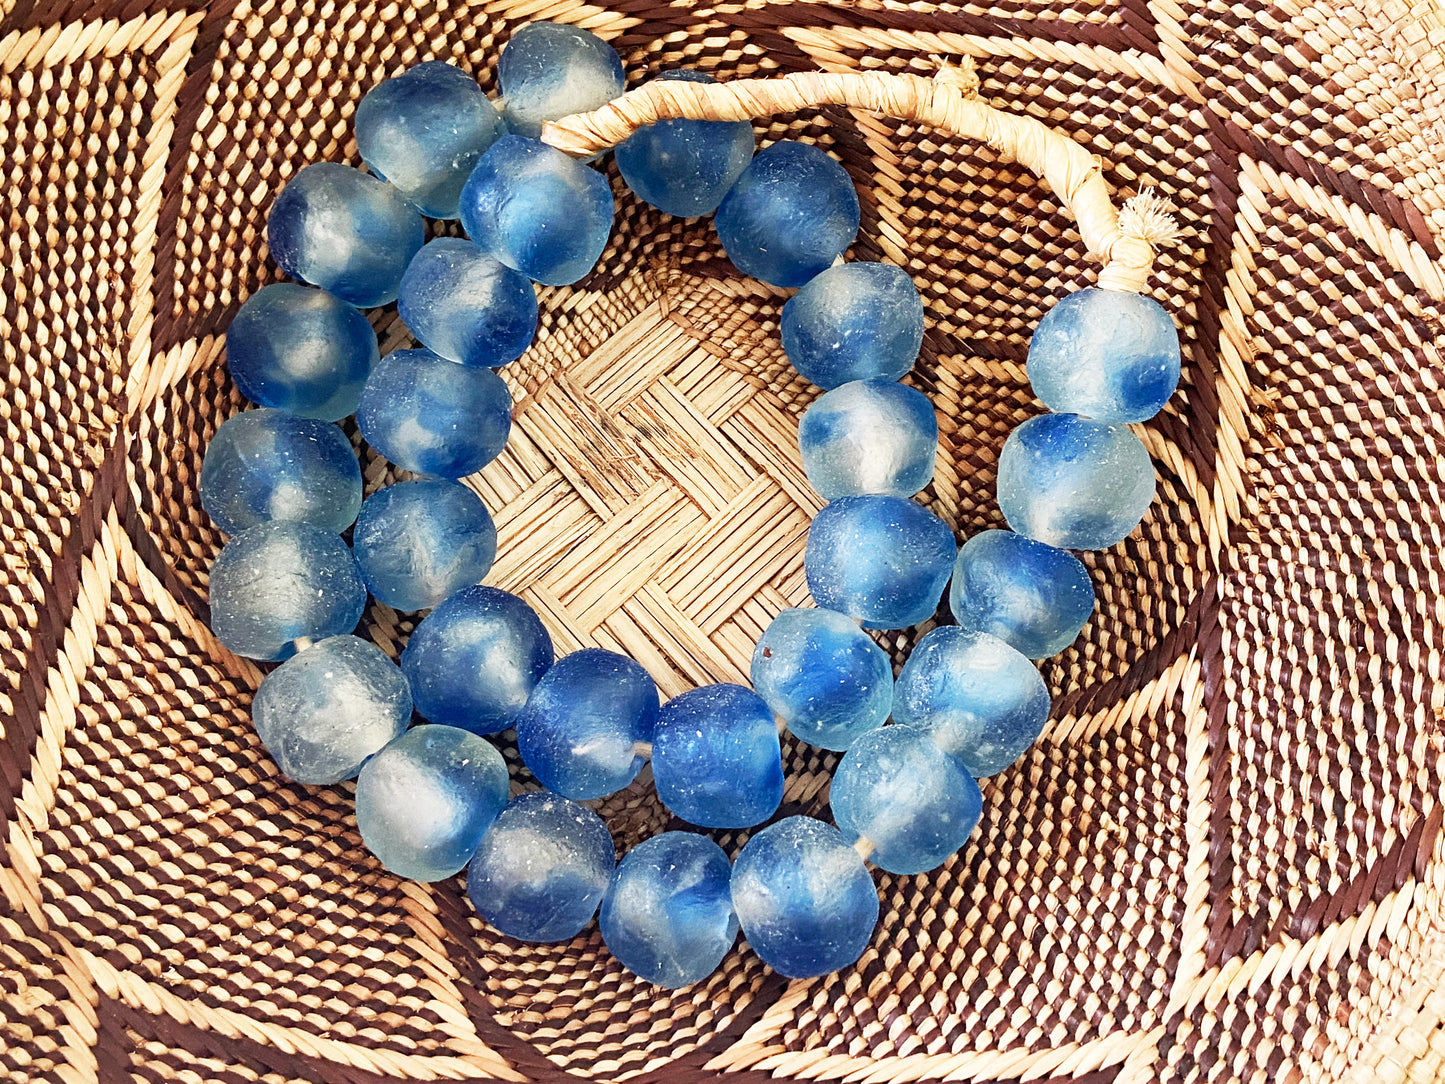 #3338 African Lg GlassTrading Beads Necklace 27" H